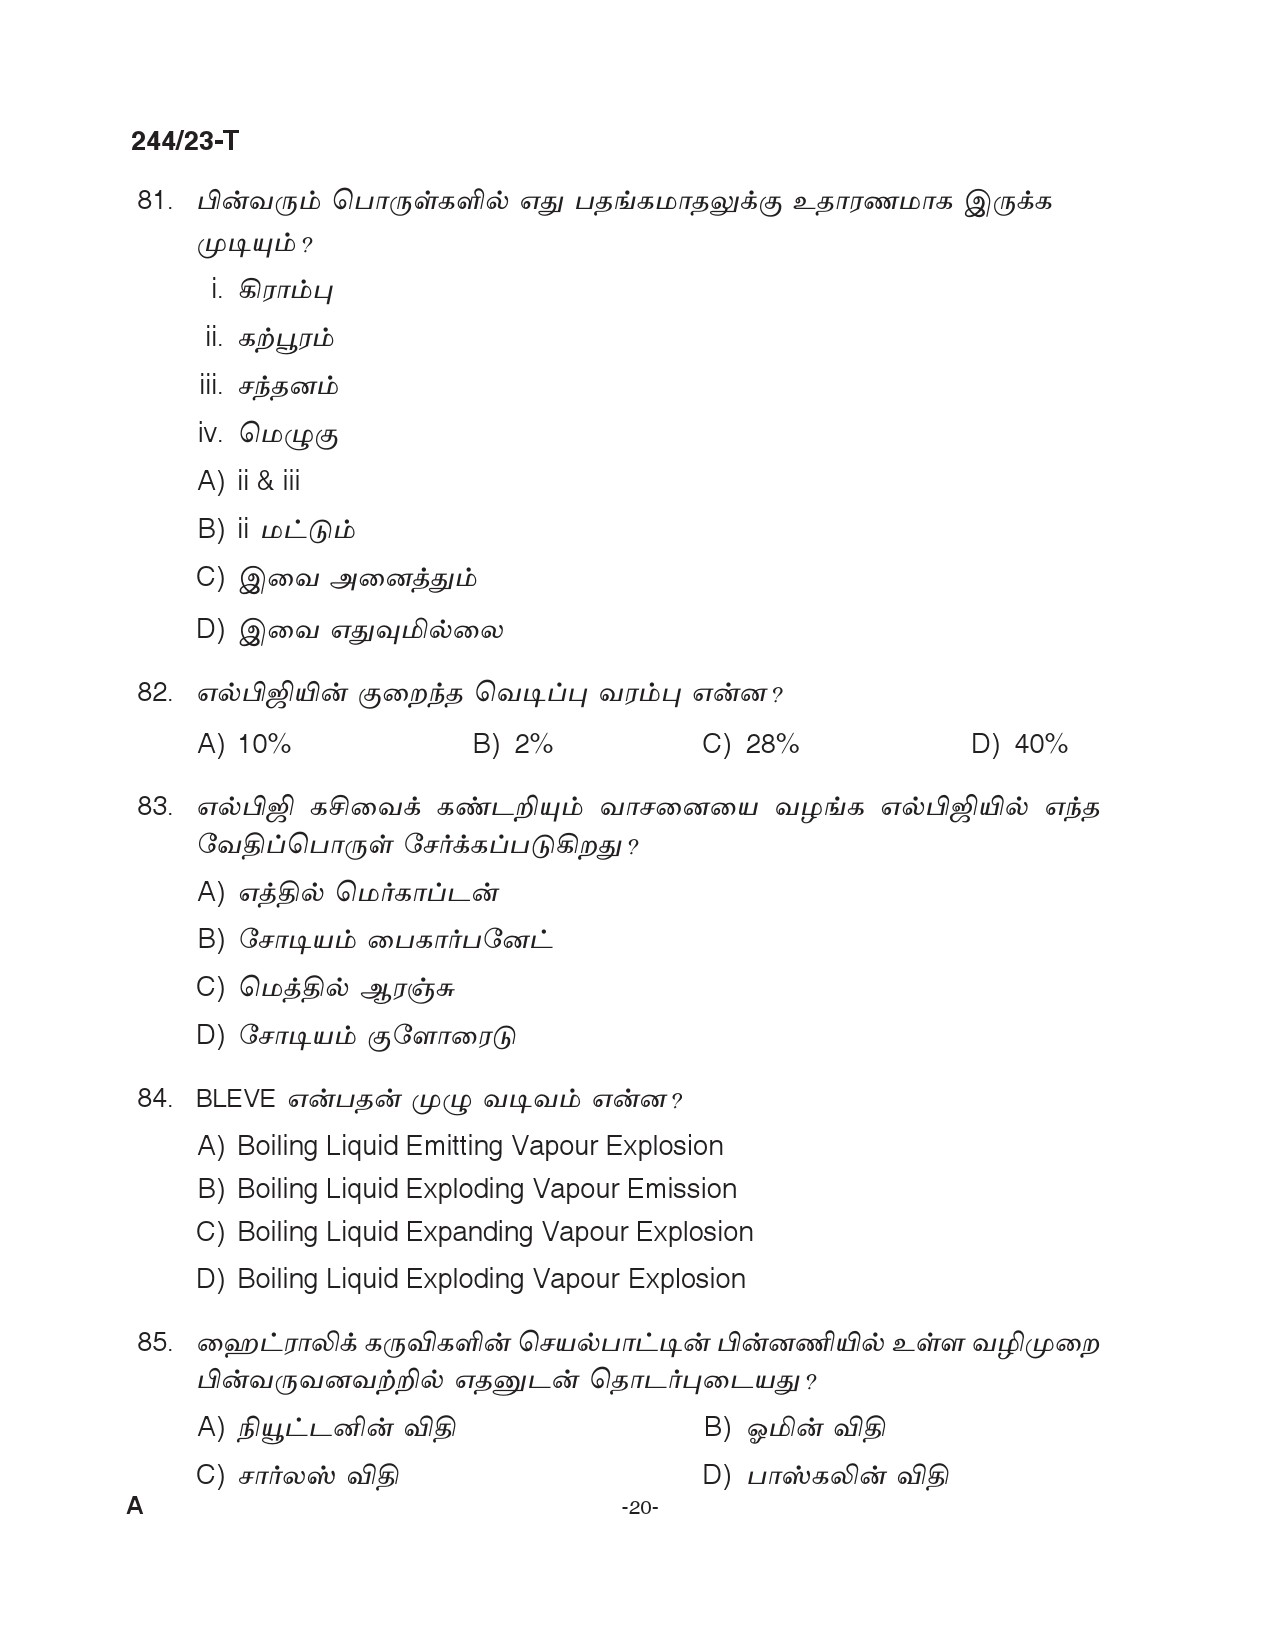 KPSC Fire and Rescue Officer Trainee Tamil Exam 2023 Code 2442023 T 19